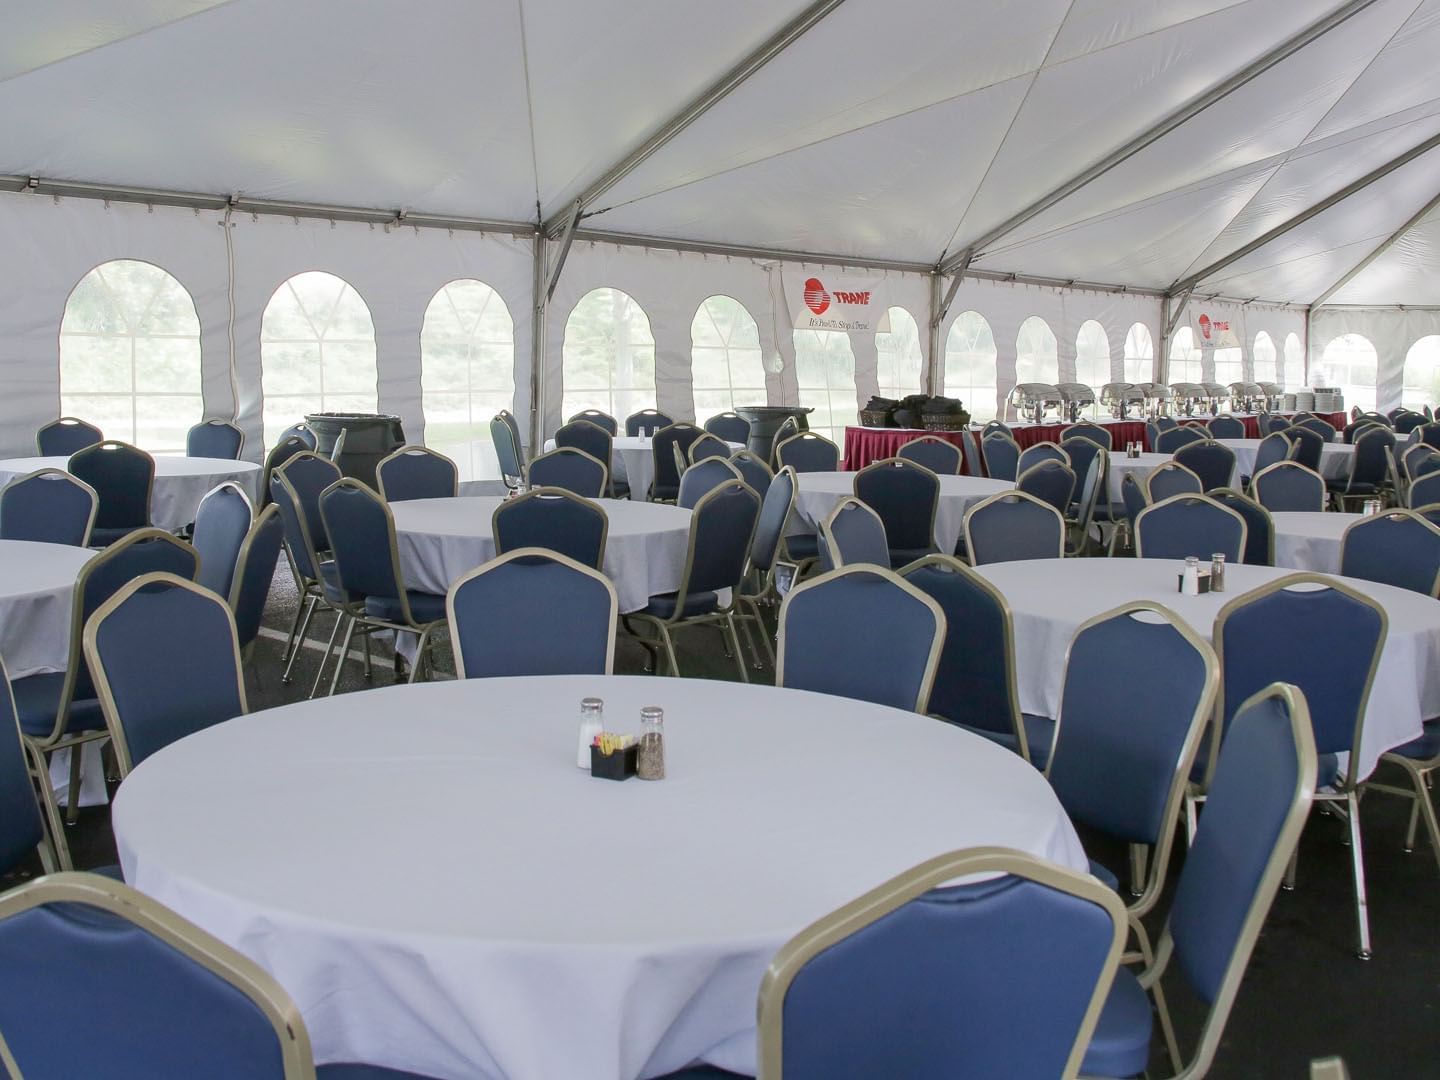 Banquet tables arranged in an Outdoor tent at Music Road Resort